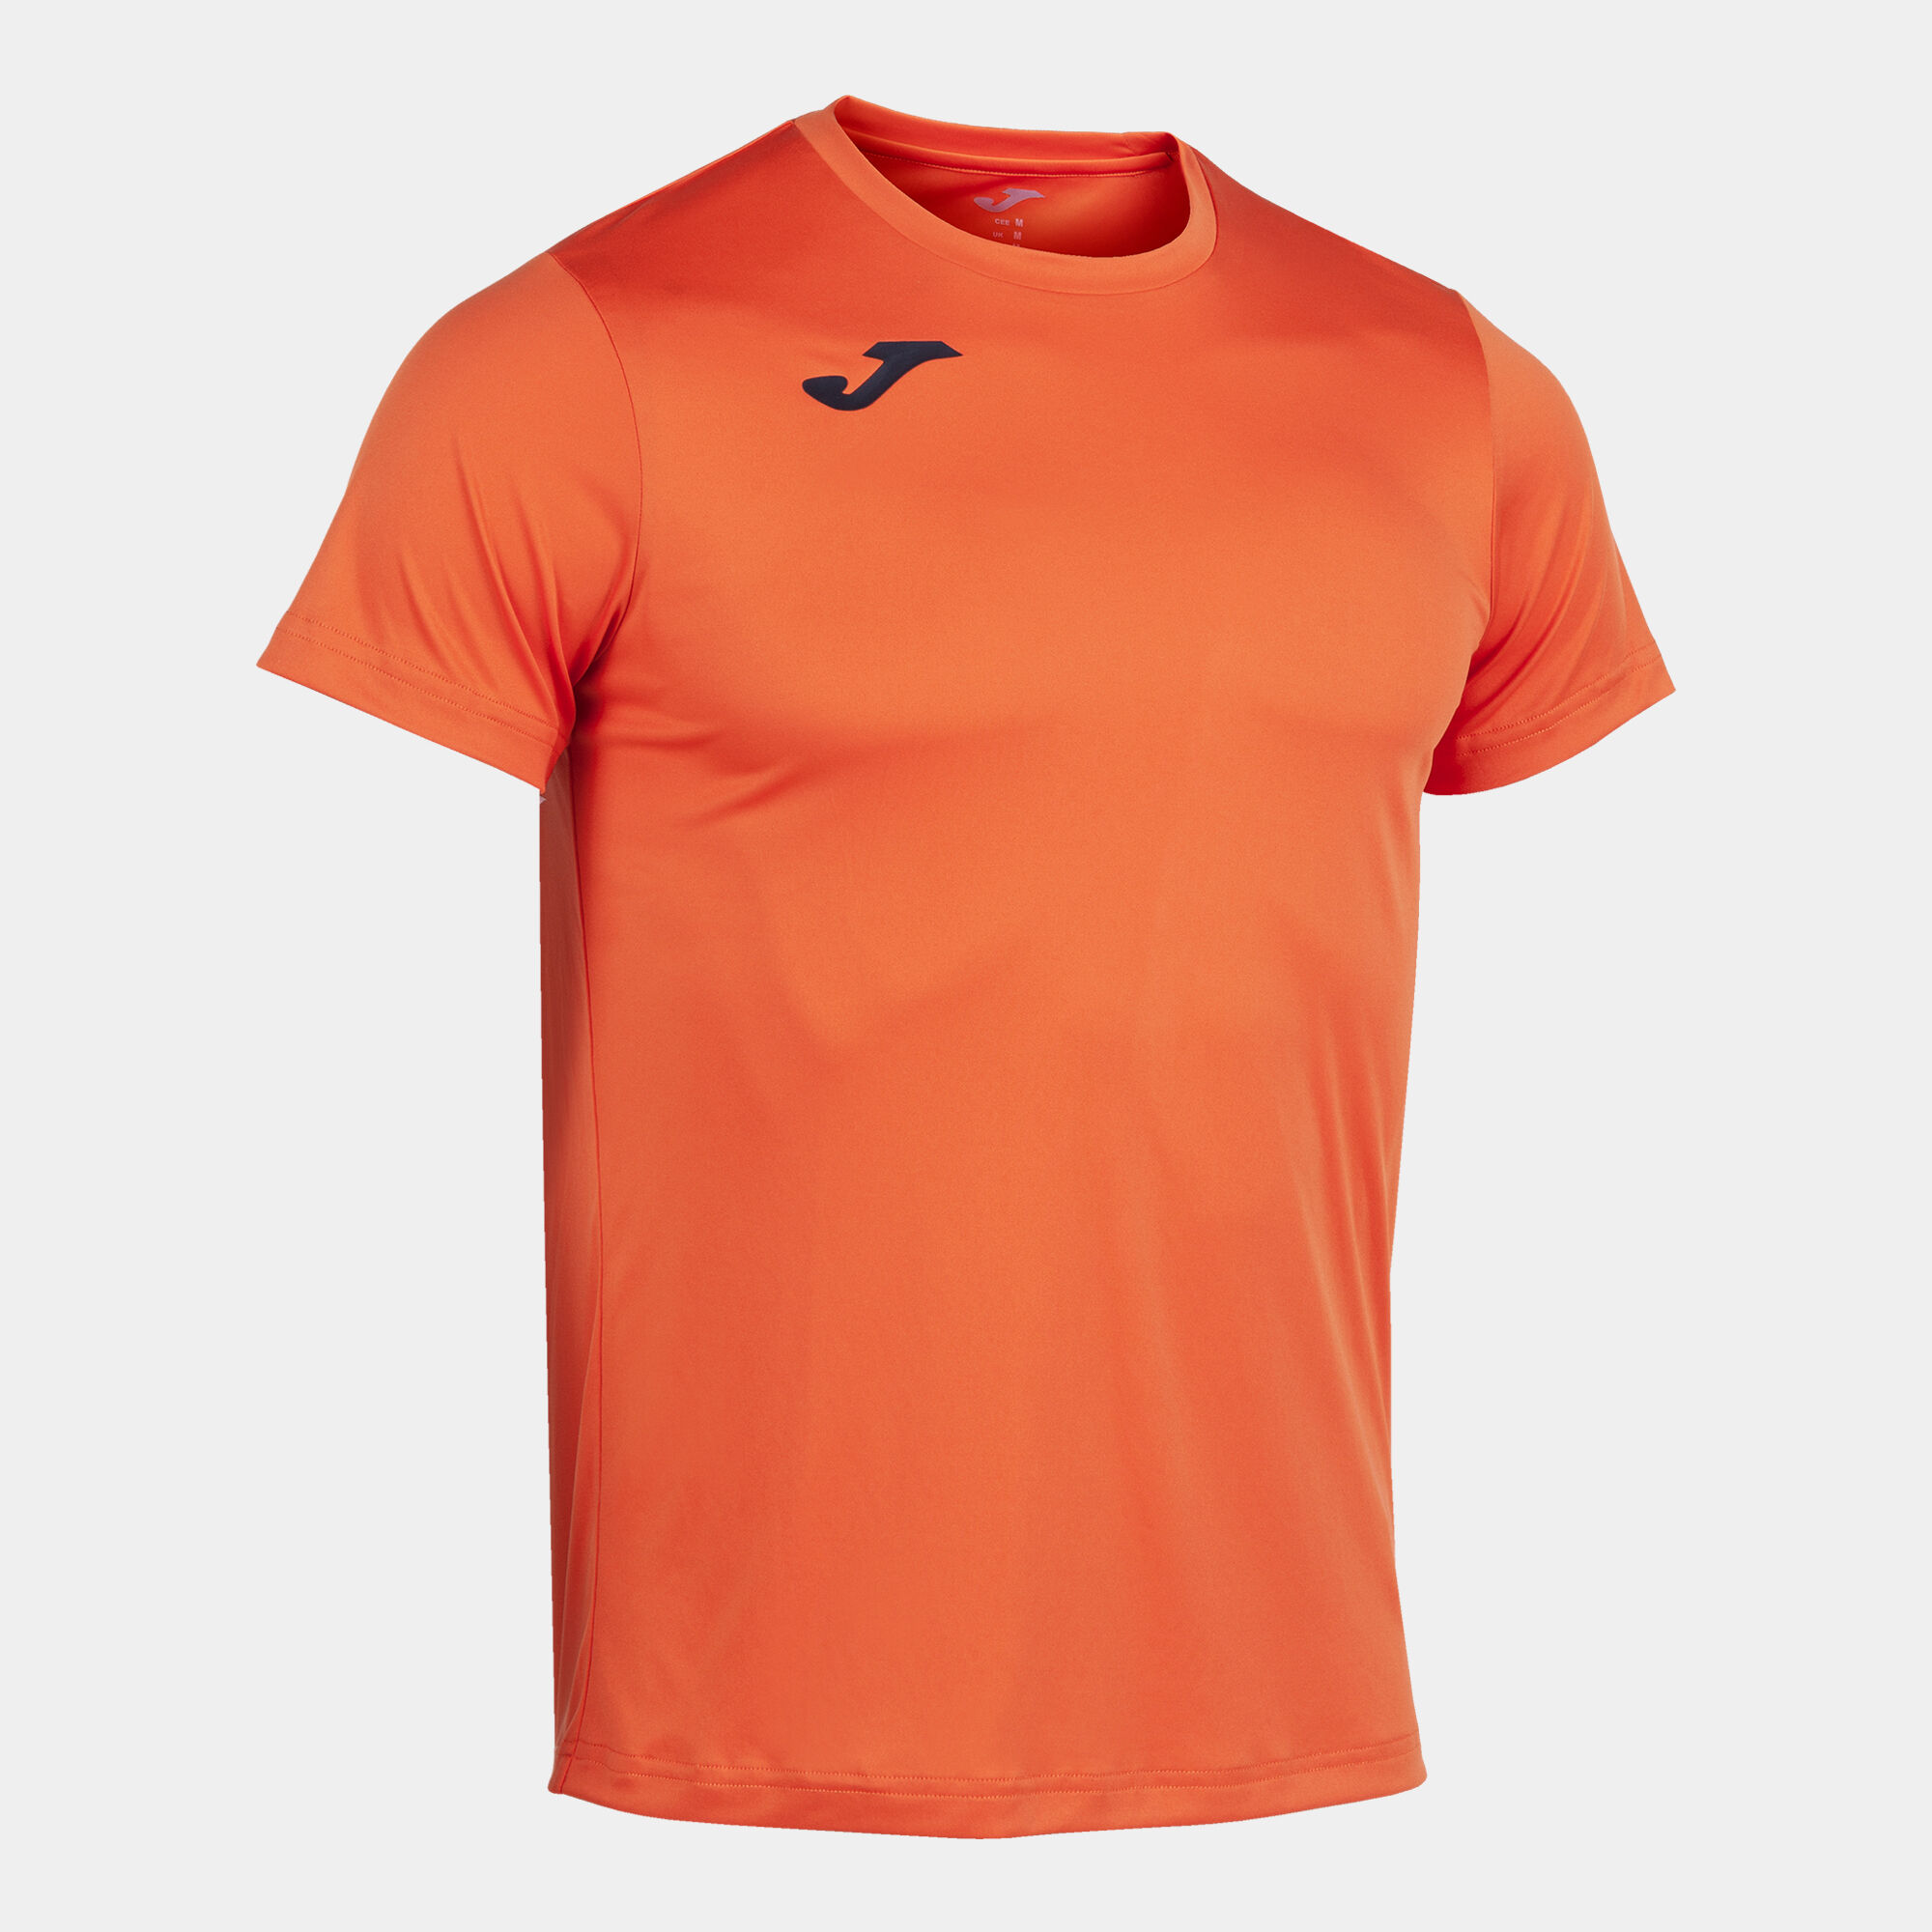 MAILLOT MANCHES COURTES HOMME RECORD II ORANGE